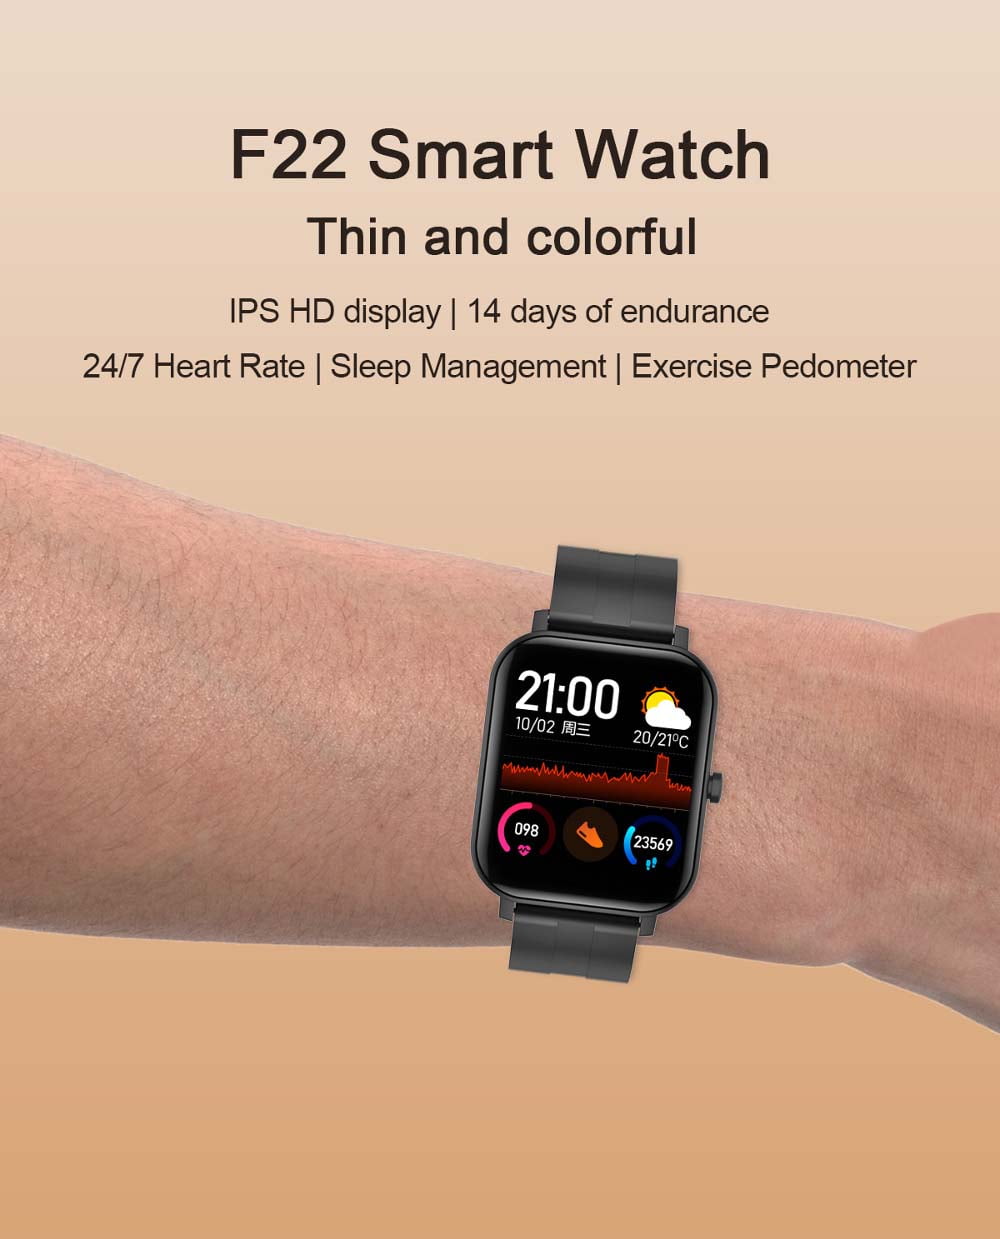 F22 Smart Watch 1.4inch wristband body temperature heart rate (11)